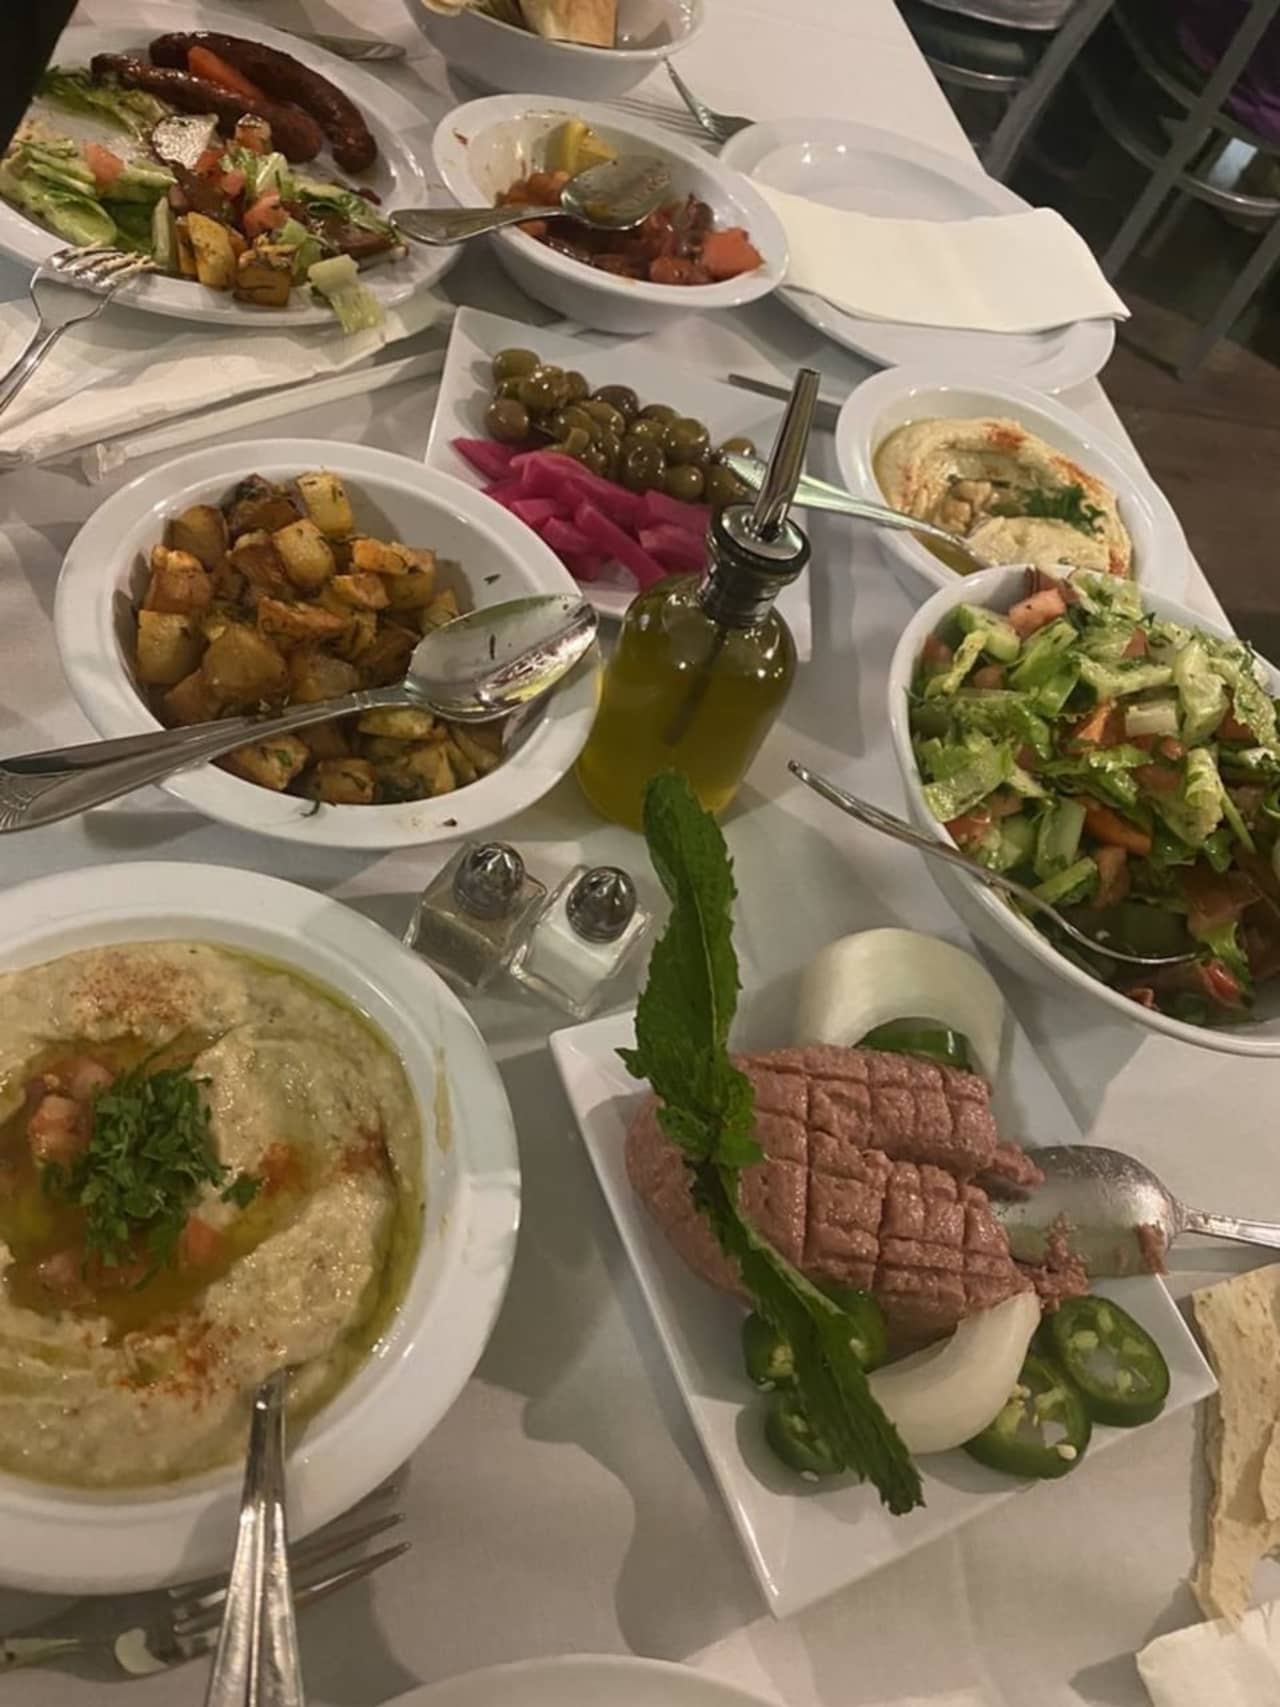 Appetizers served at Beit Zaytoon